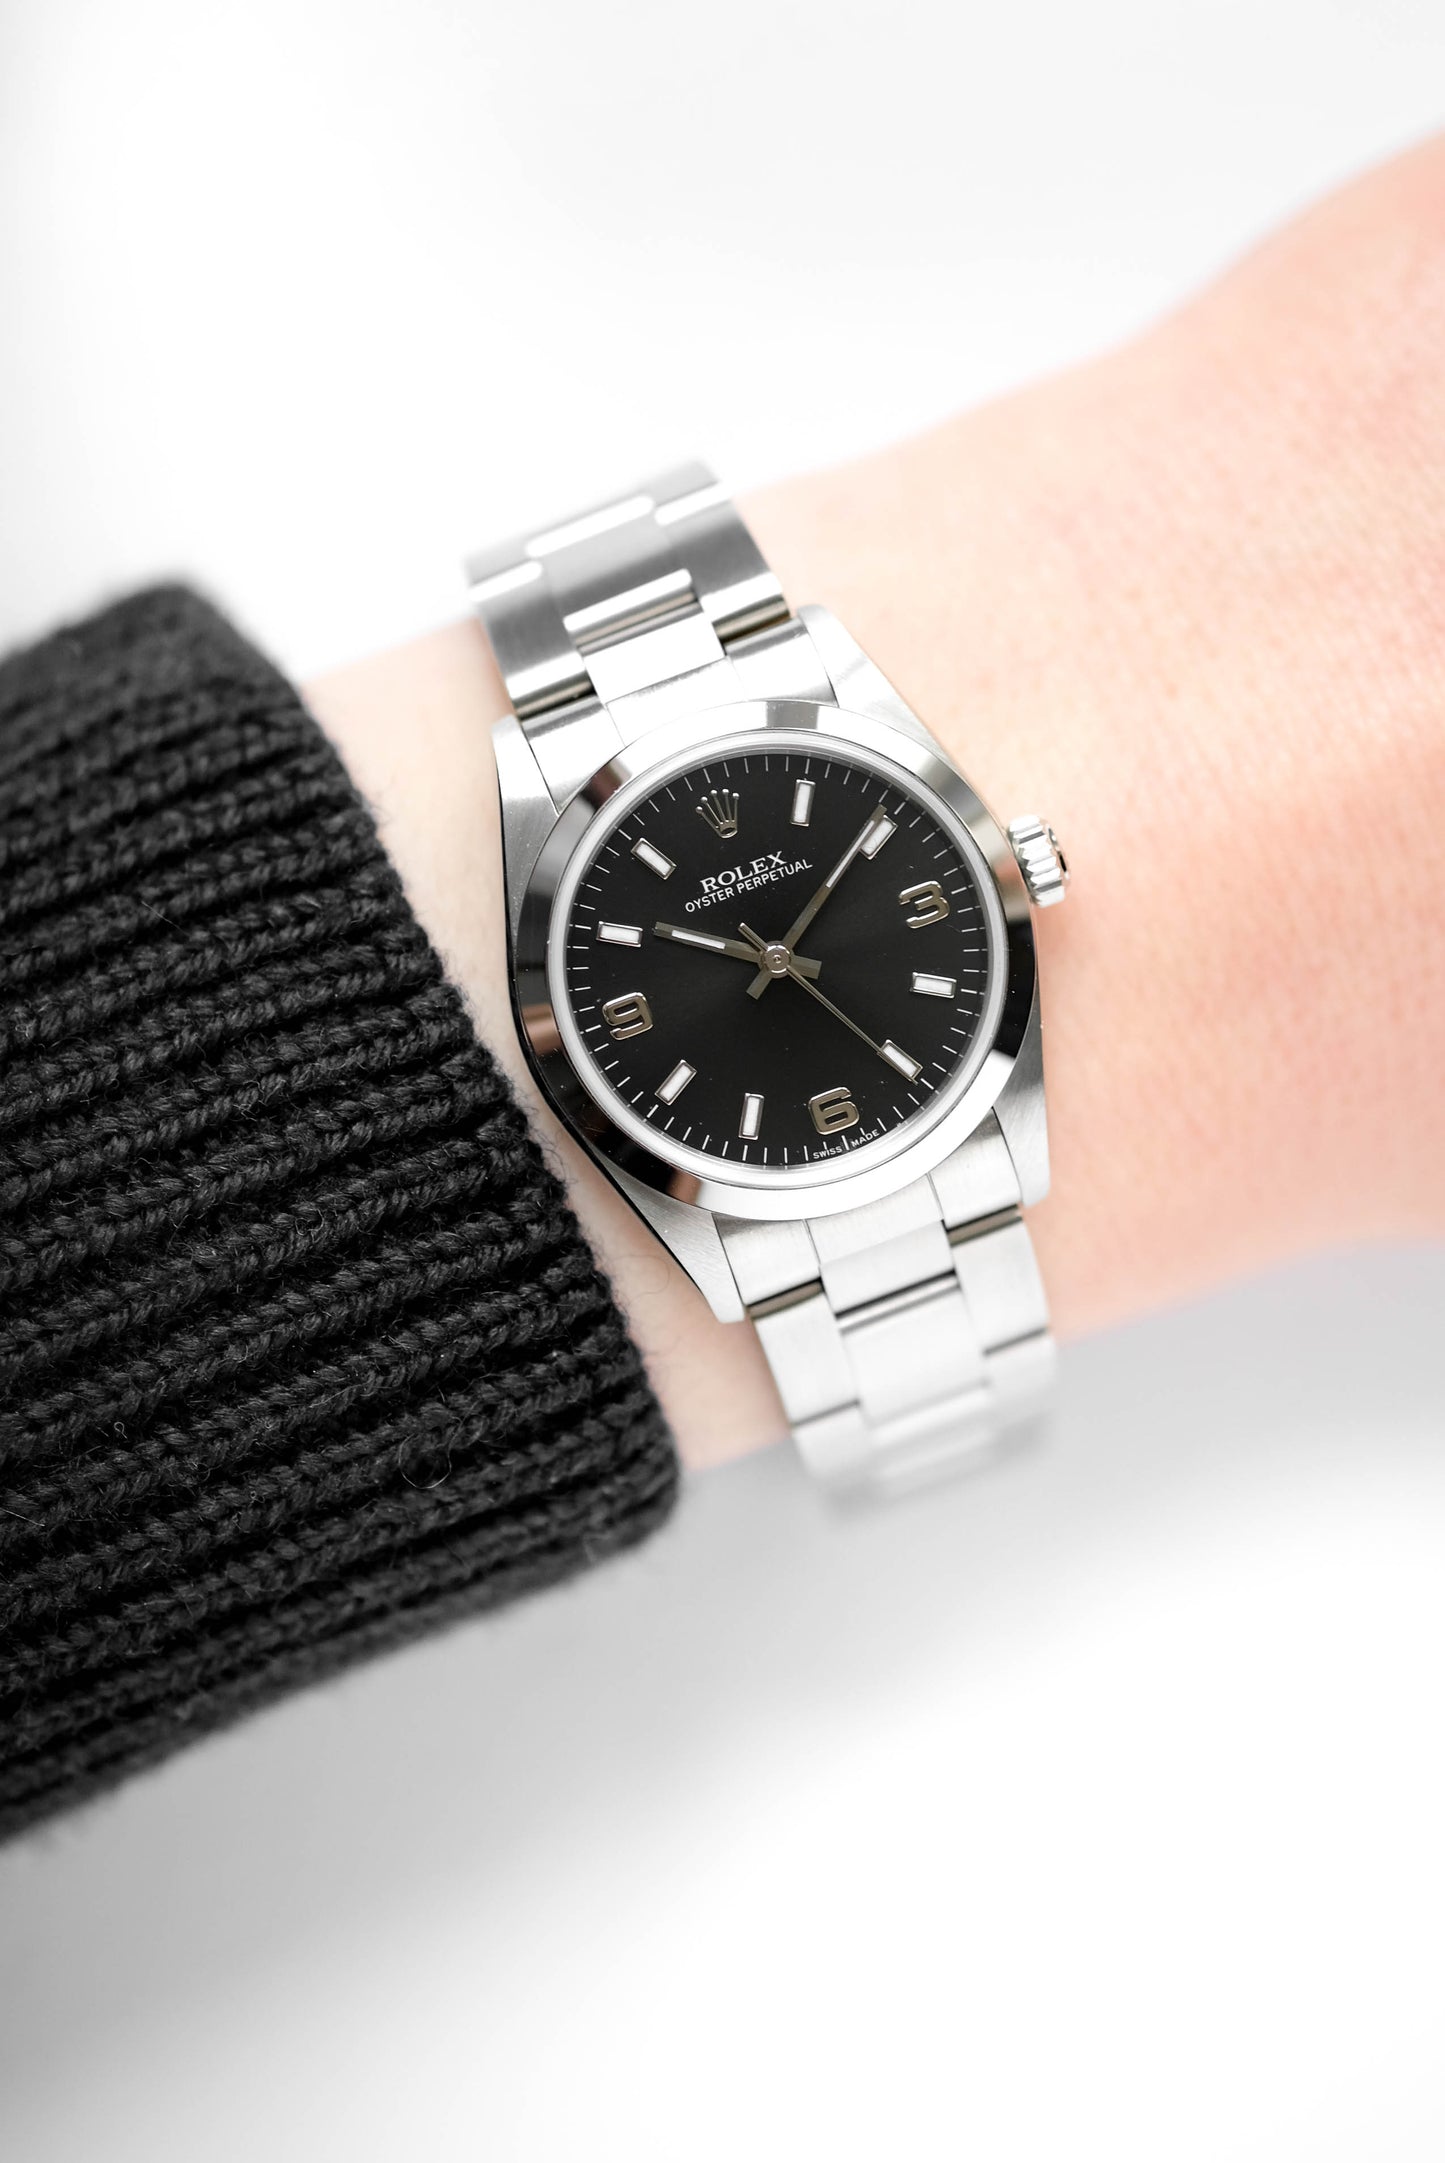 Rolex Oyster Perpetual "Baby Explorer" Ref. 77080 - 1999